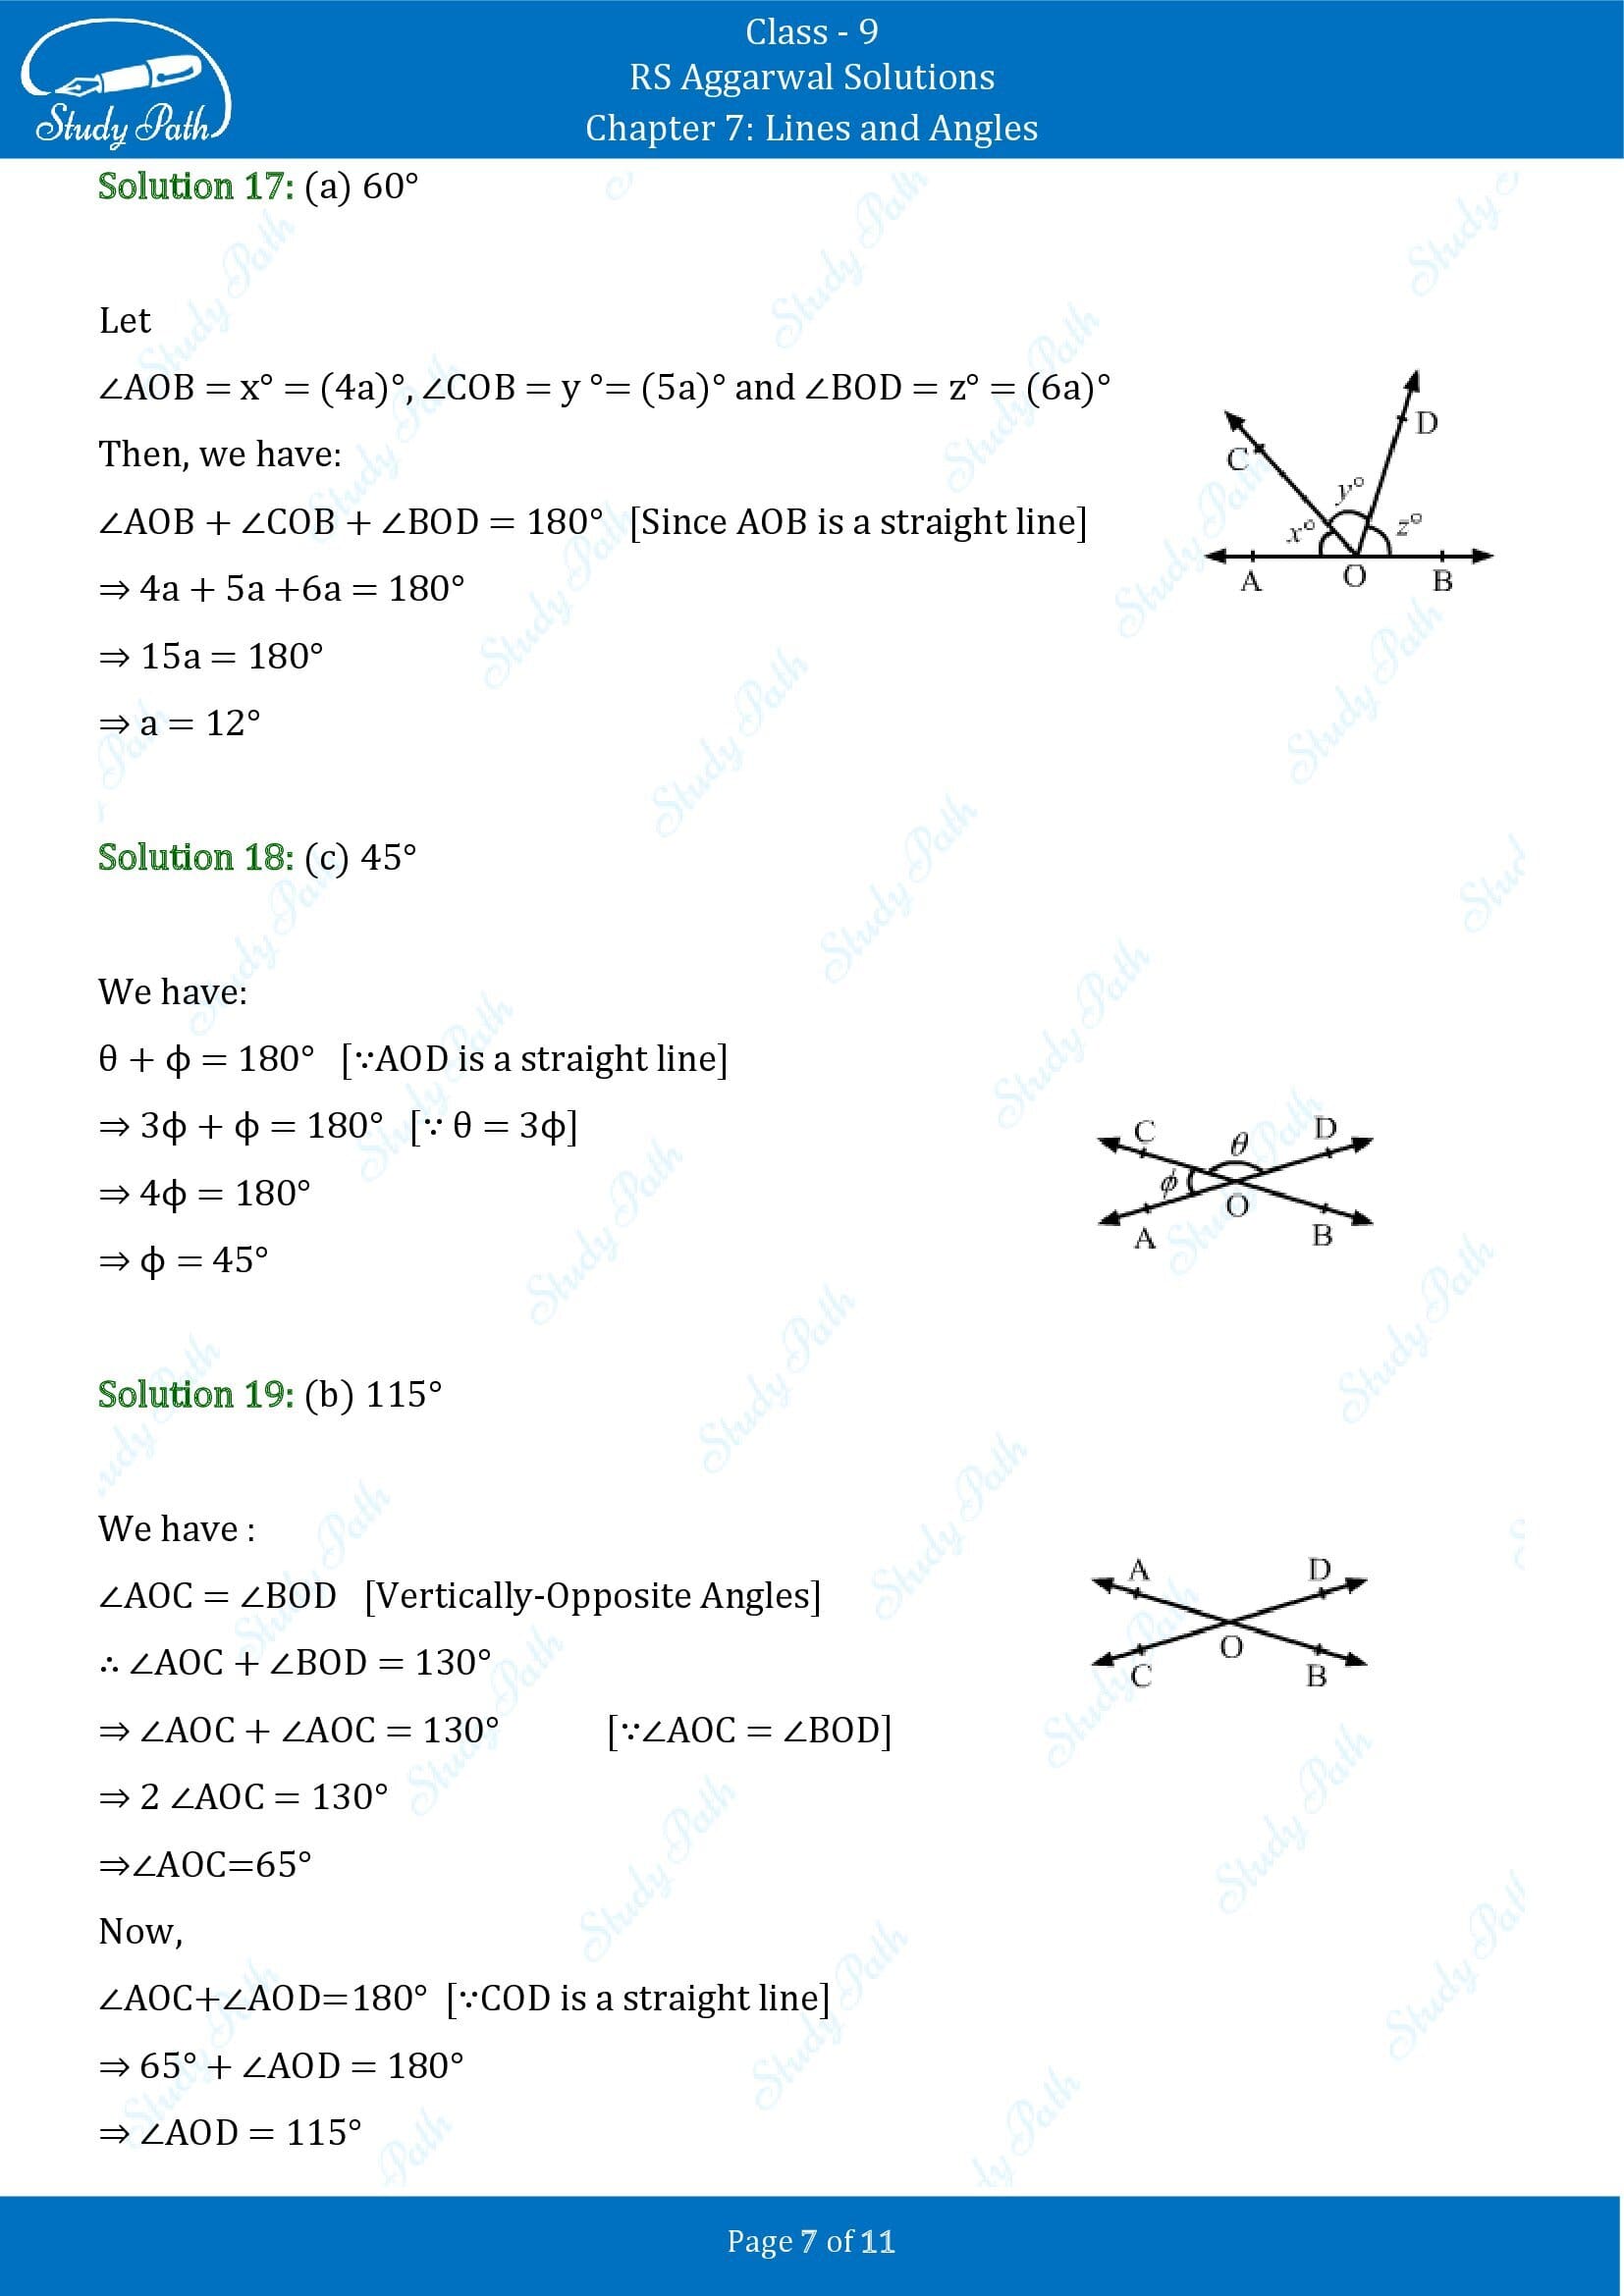 RS Aggarwal Solutions Class 9 Chapter 7 Lines and Angles Multiple Choice Questions MCQs 00007